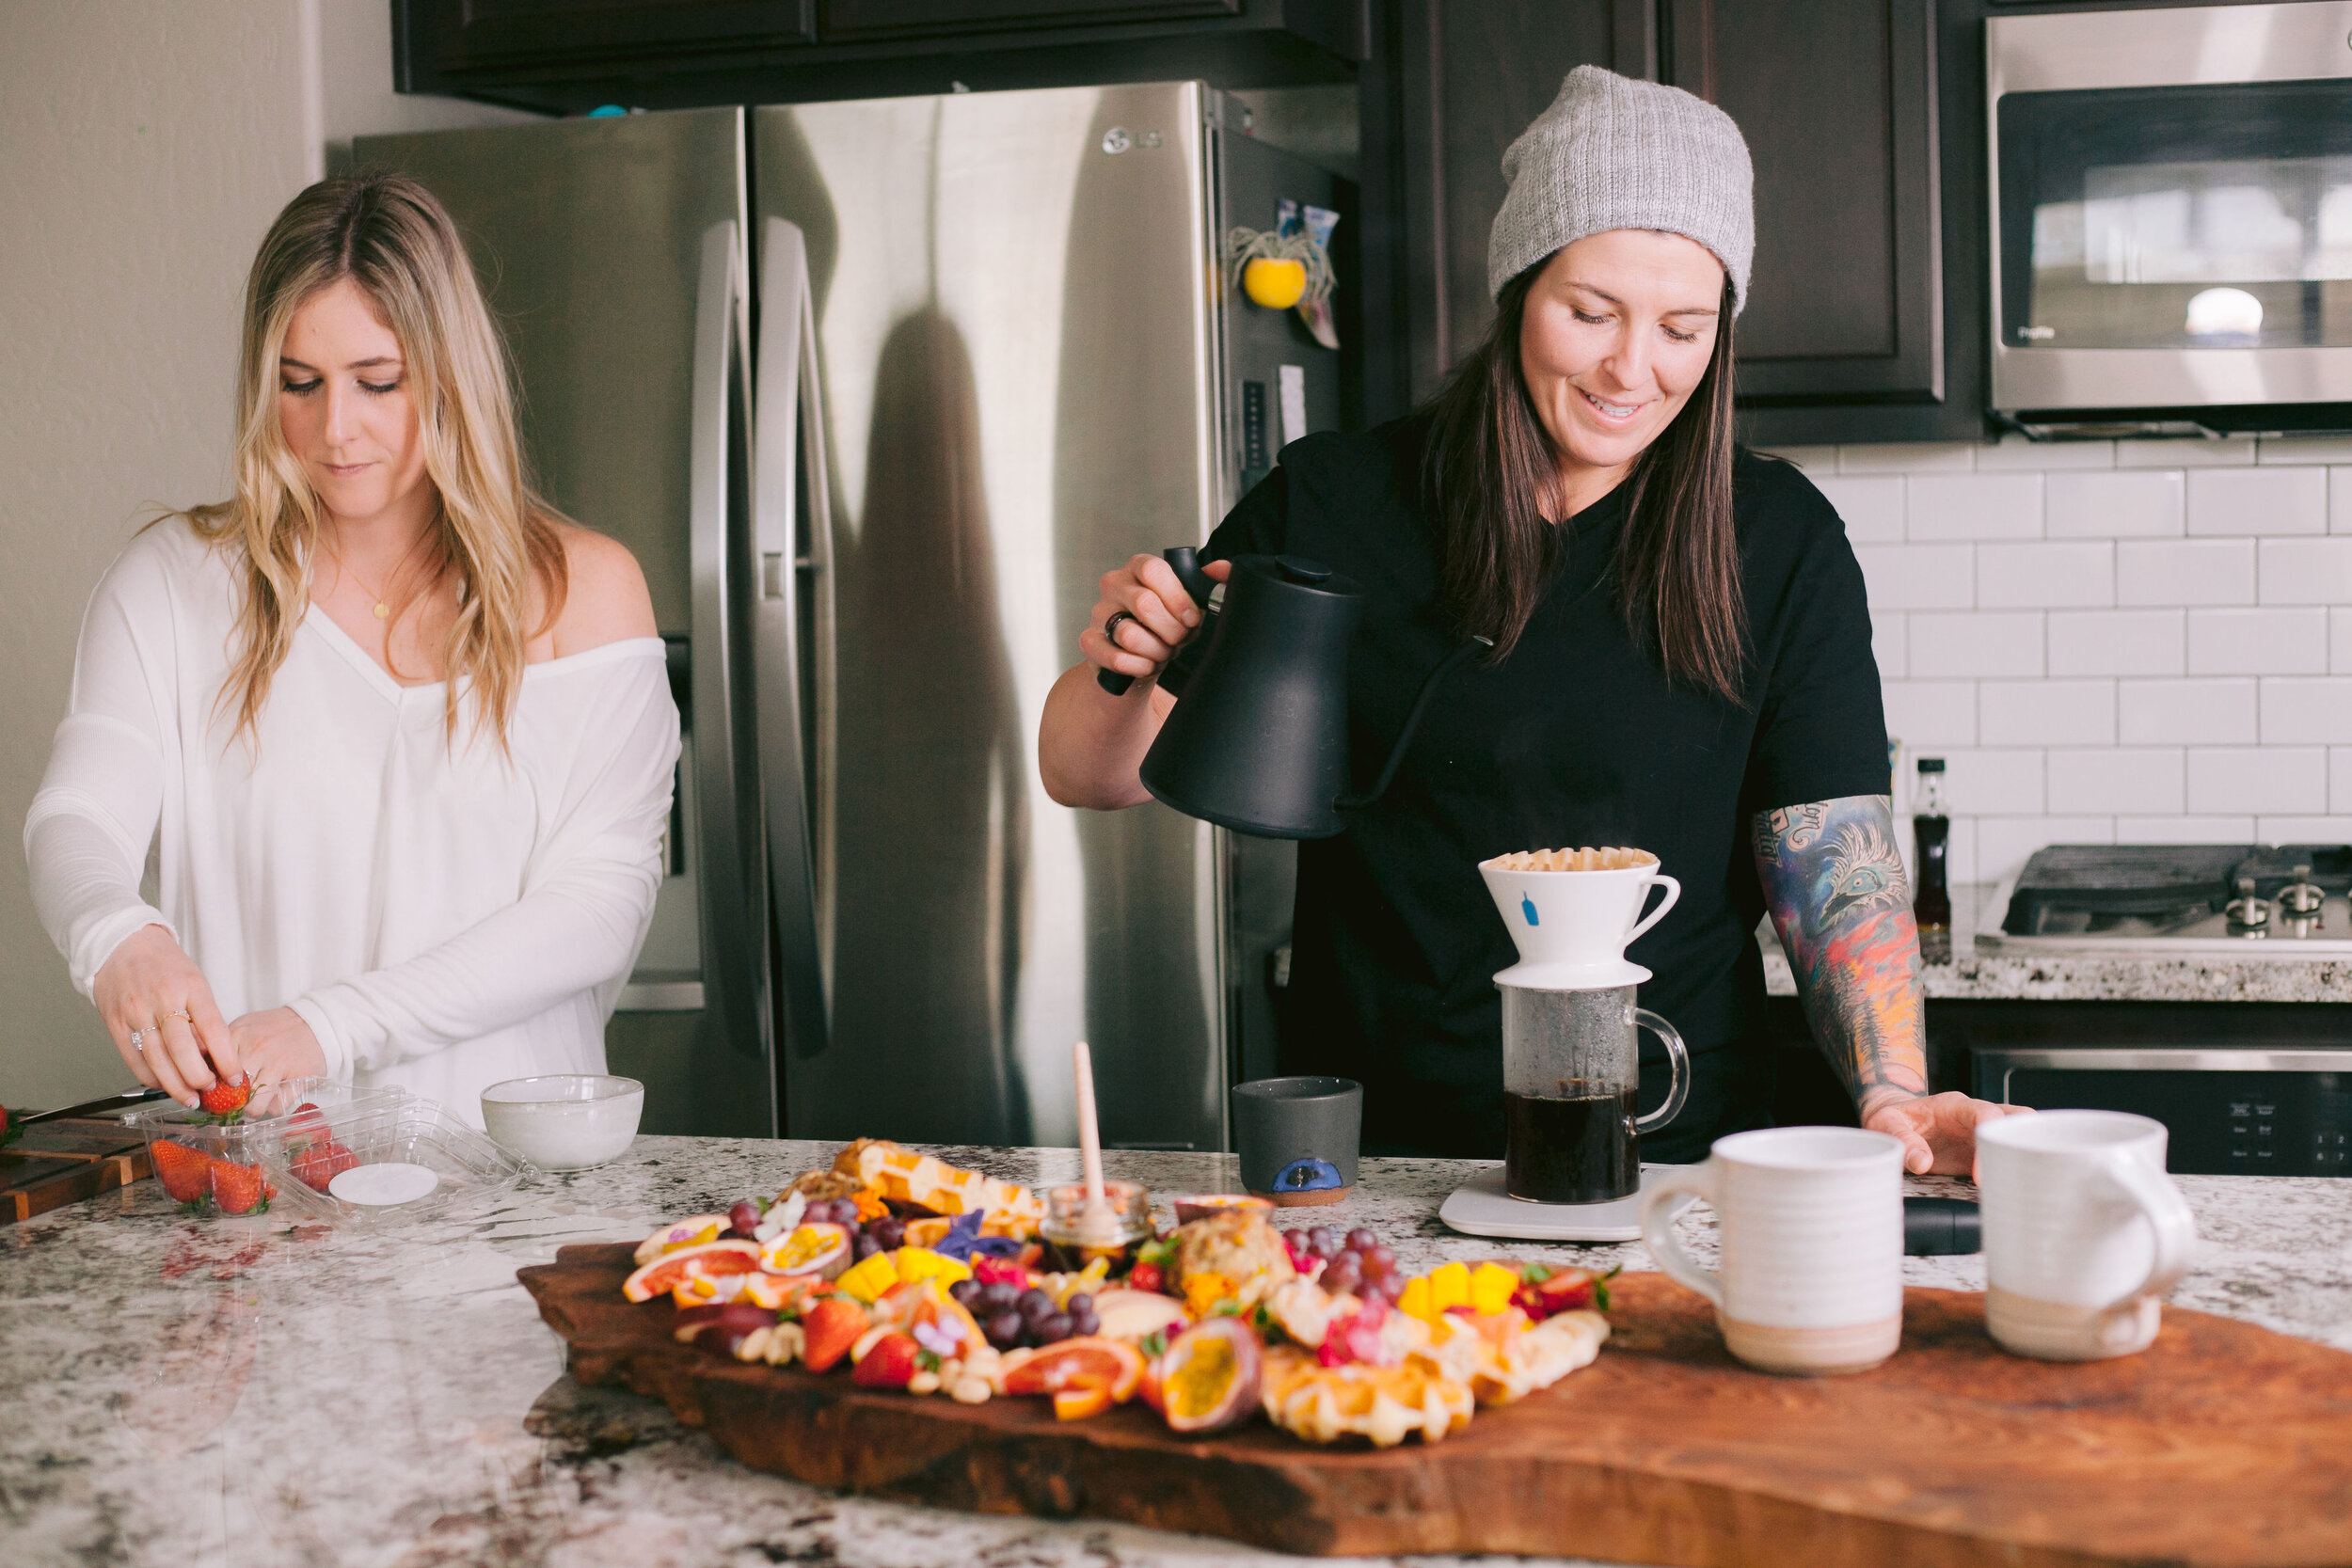 Two women make breakfast in kitchen with coffee and fruit.